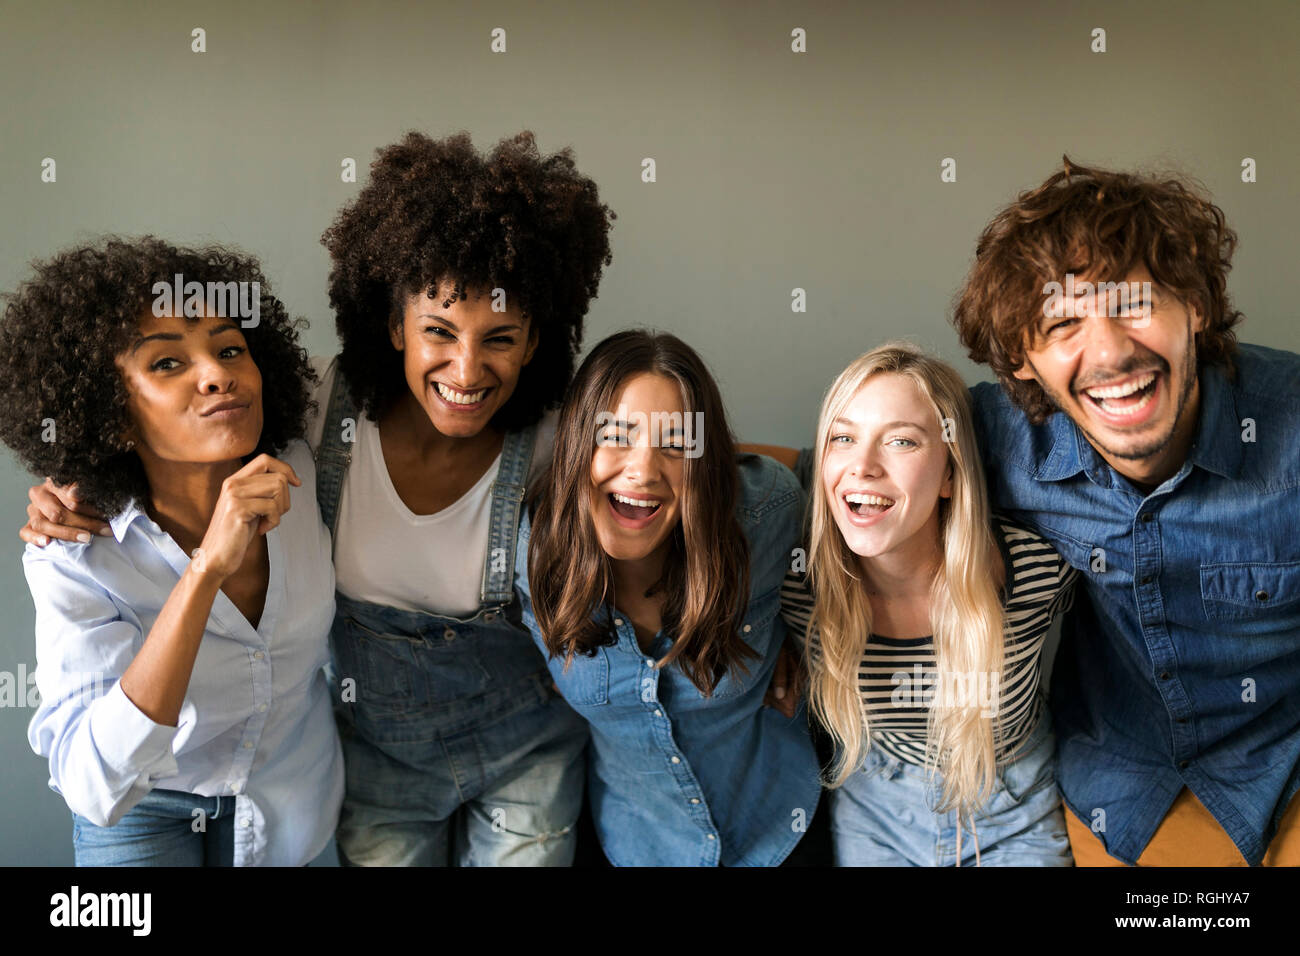 Group portrait of cheerful friends Stock Photo